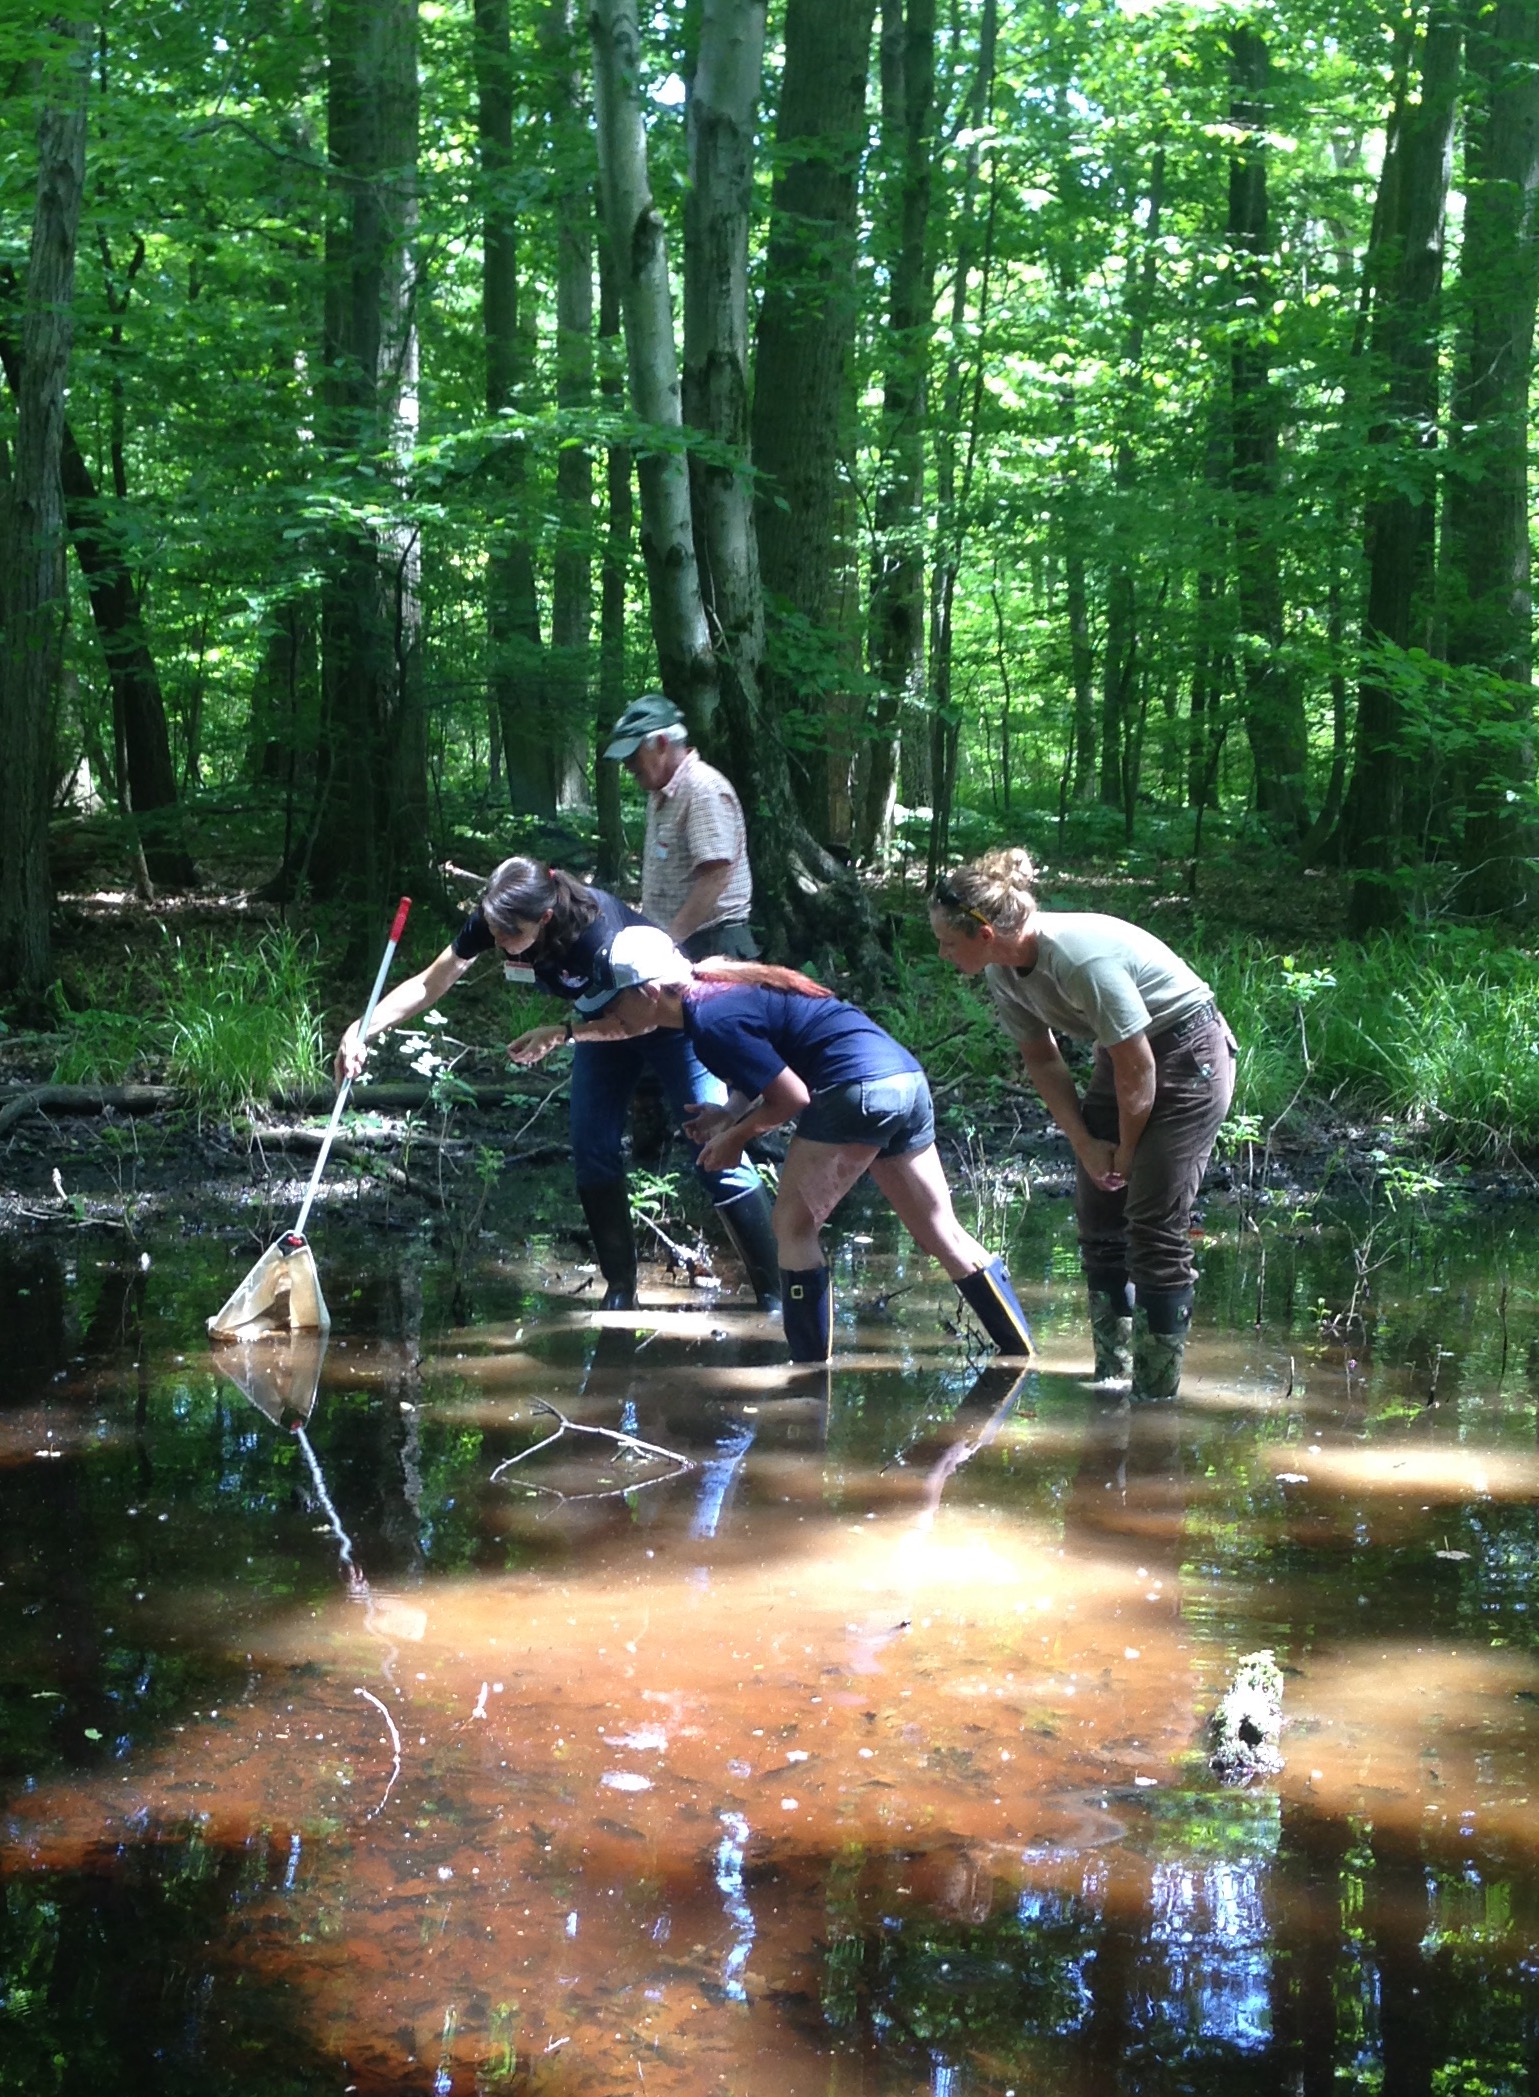 Looking for salamanders in this vernal pool on Ohio State's Mansfield campus!